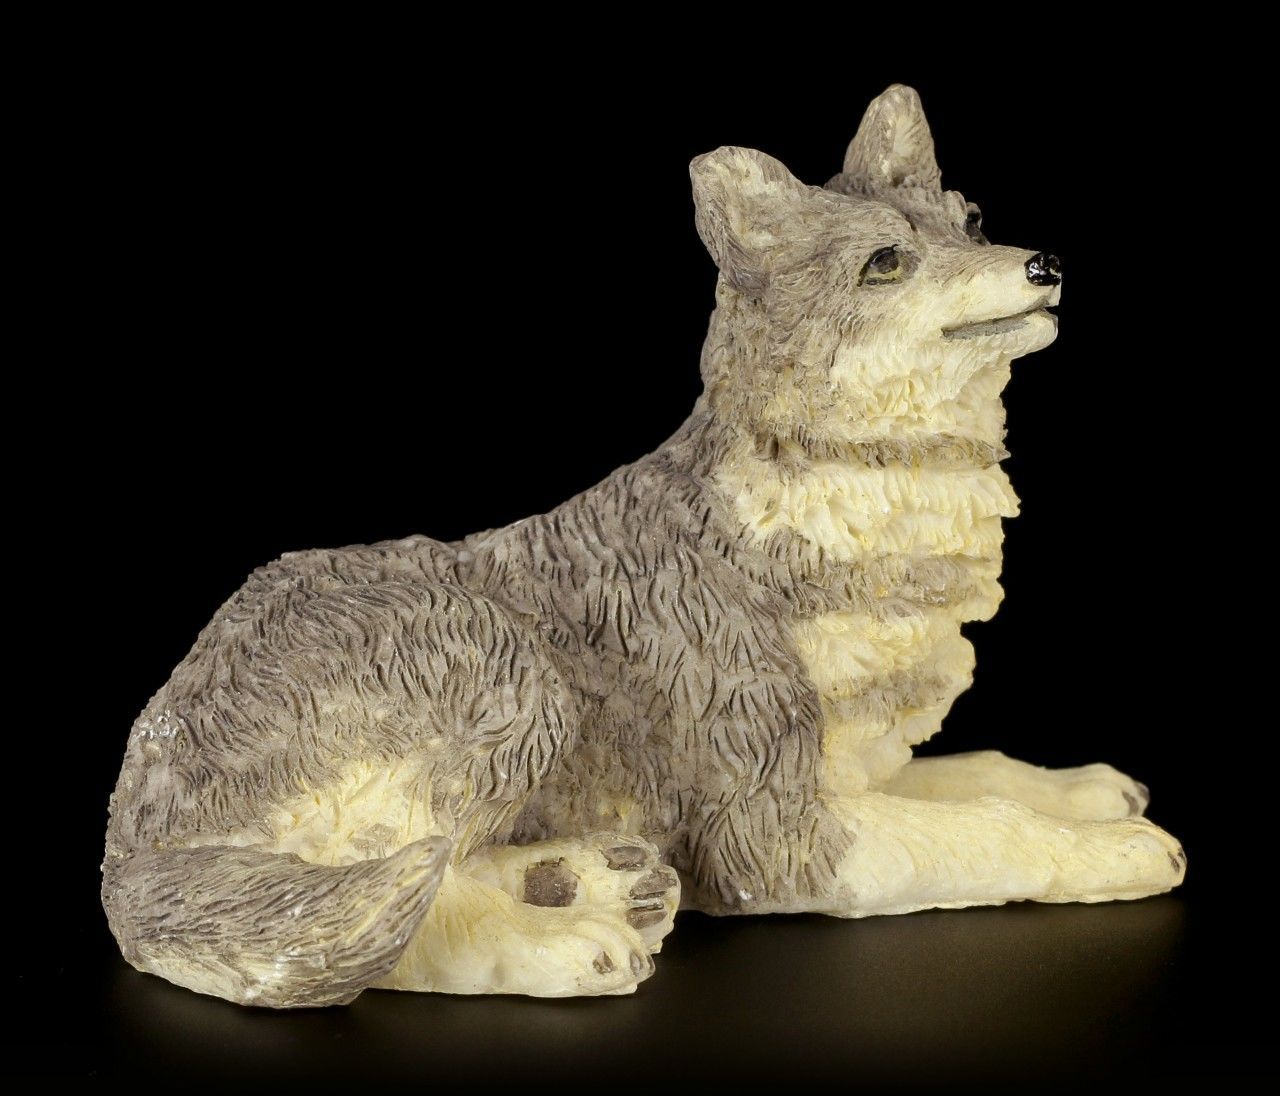 Wolf Figurine - Let's take a Rest